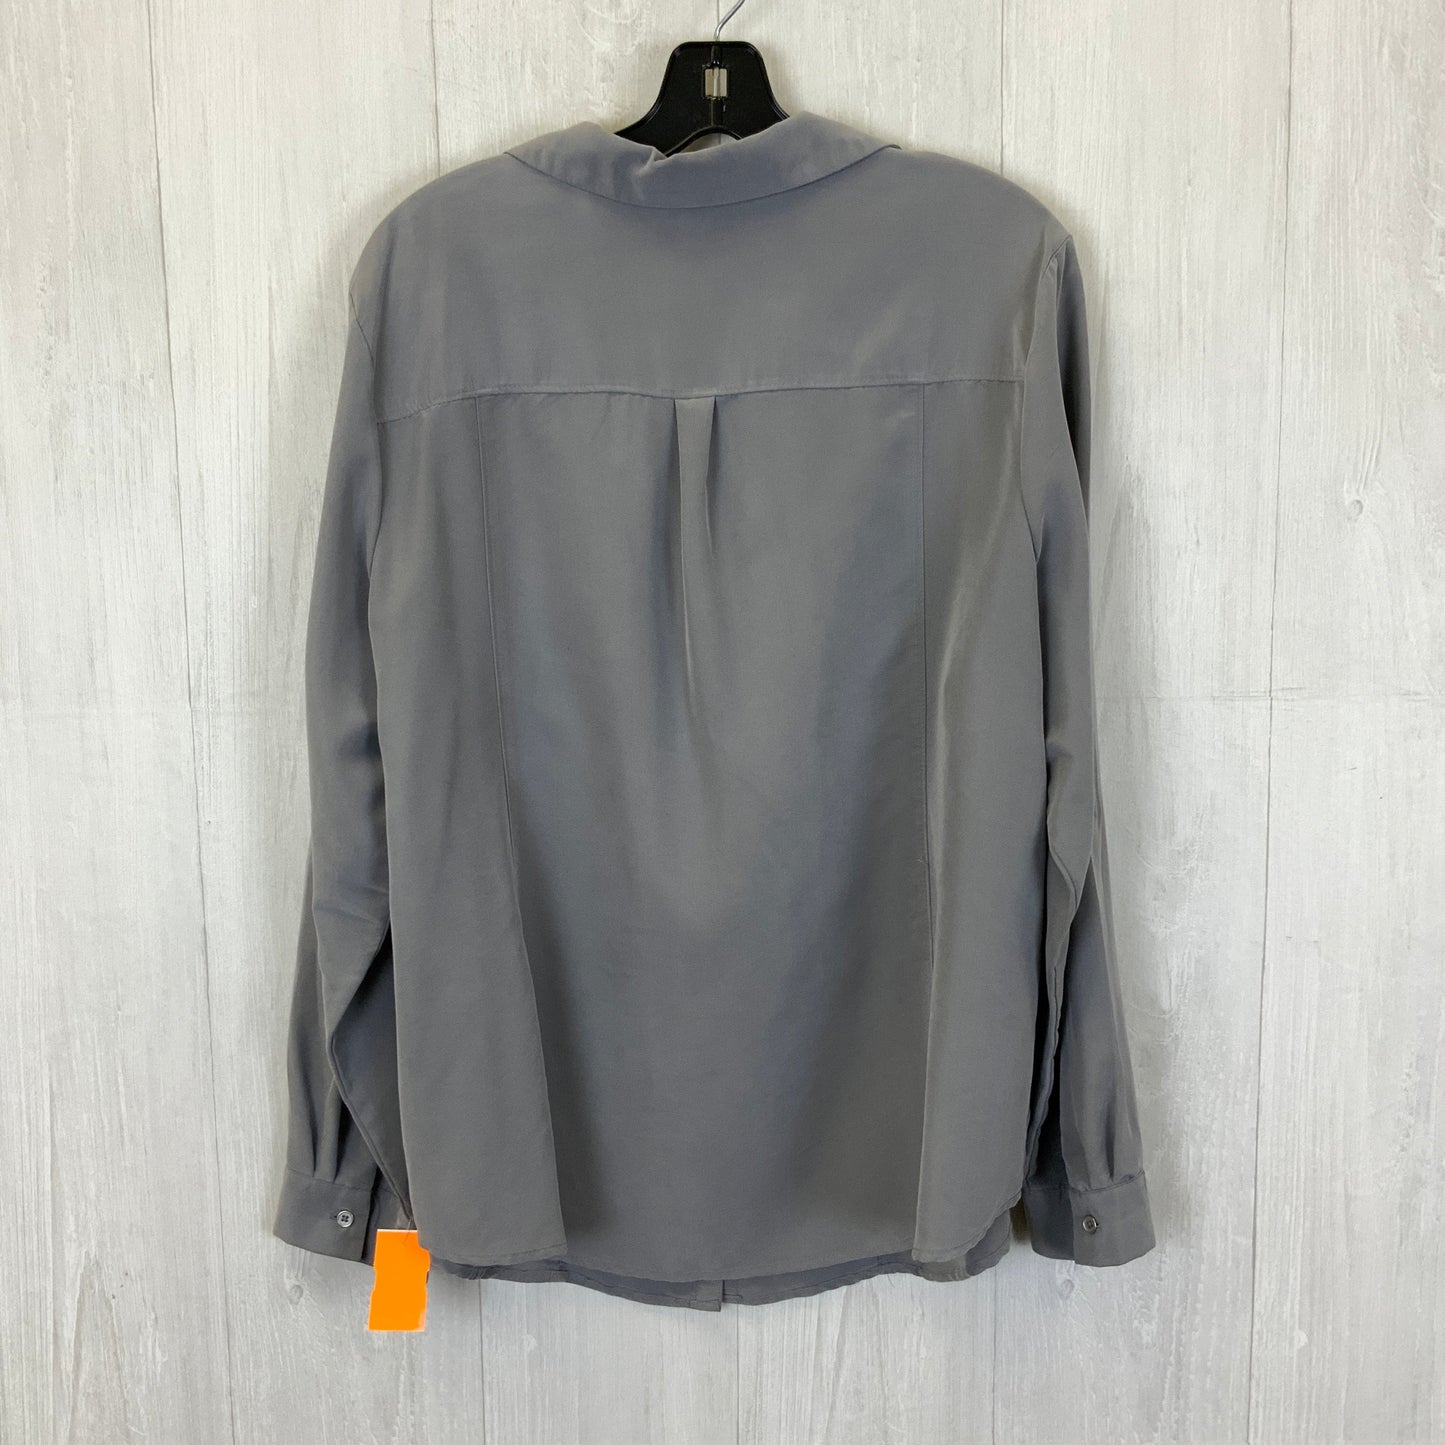 Grey Blouse Long Sleeve Roz And Ali, Size 2x